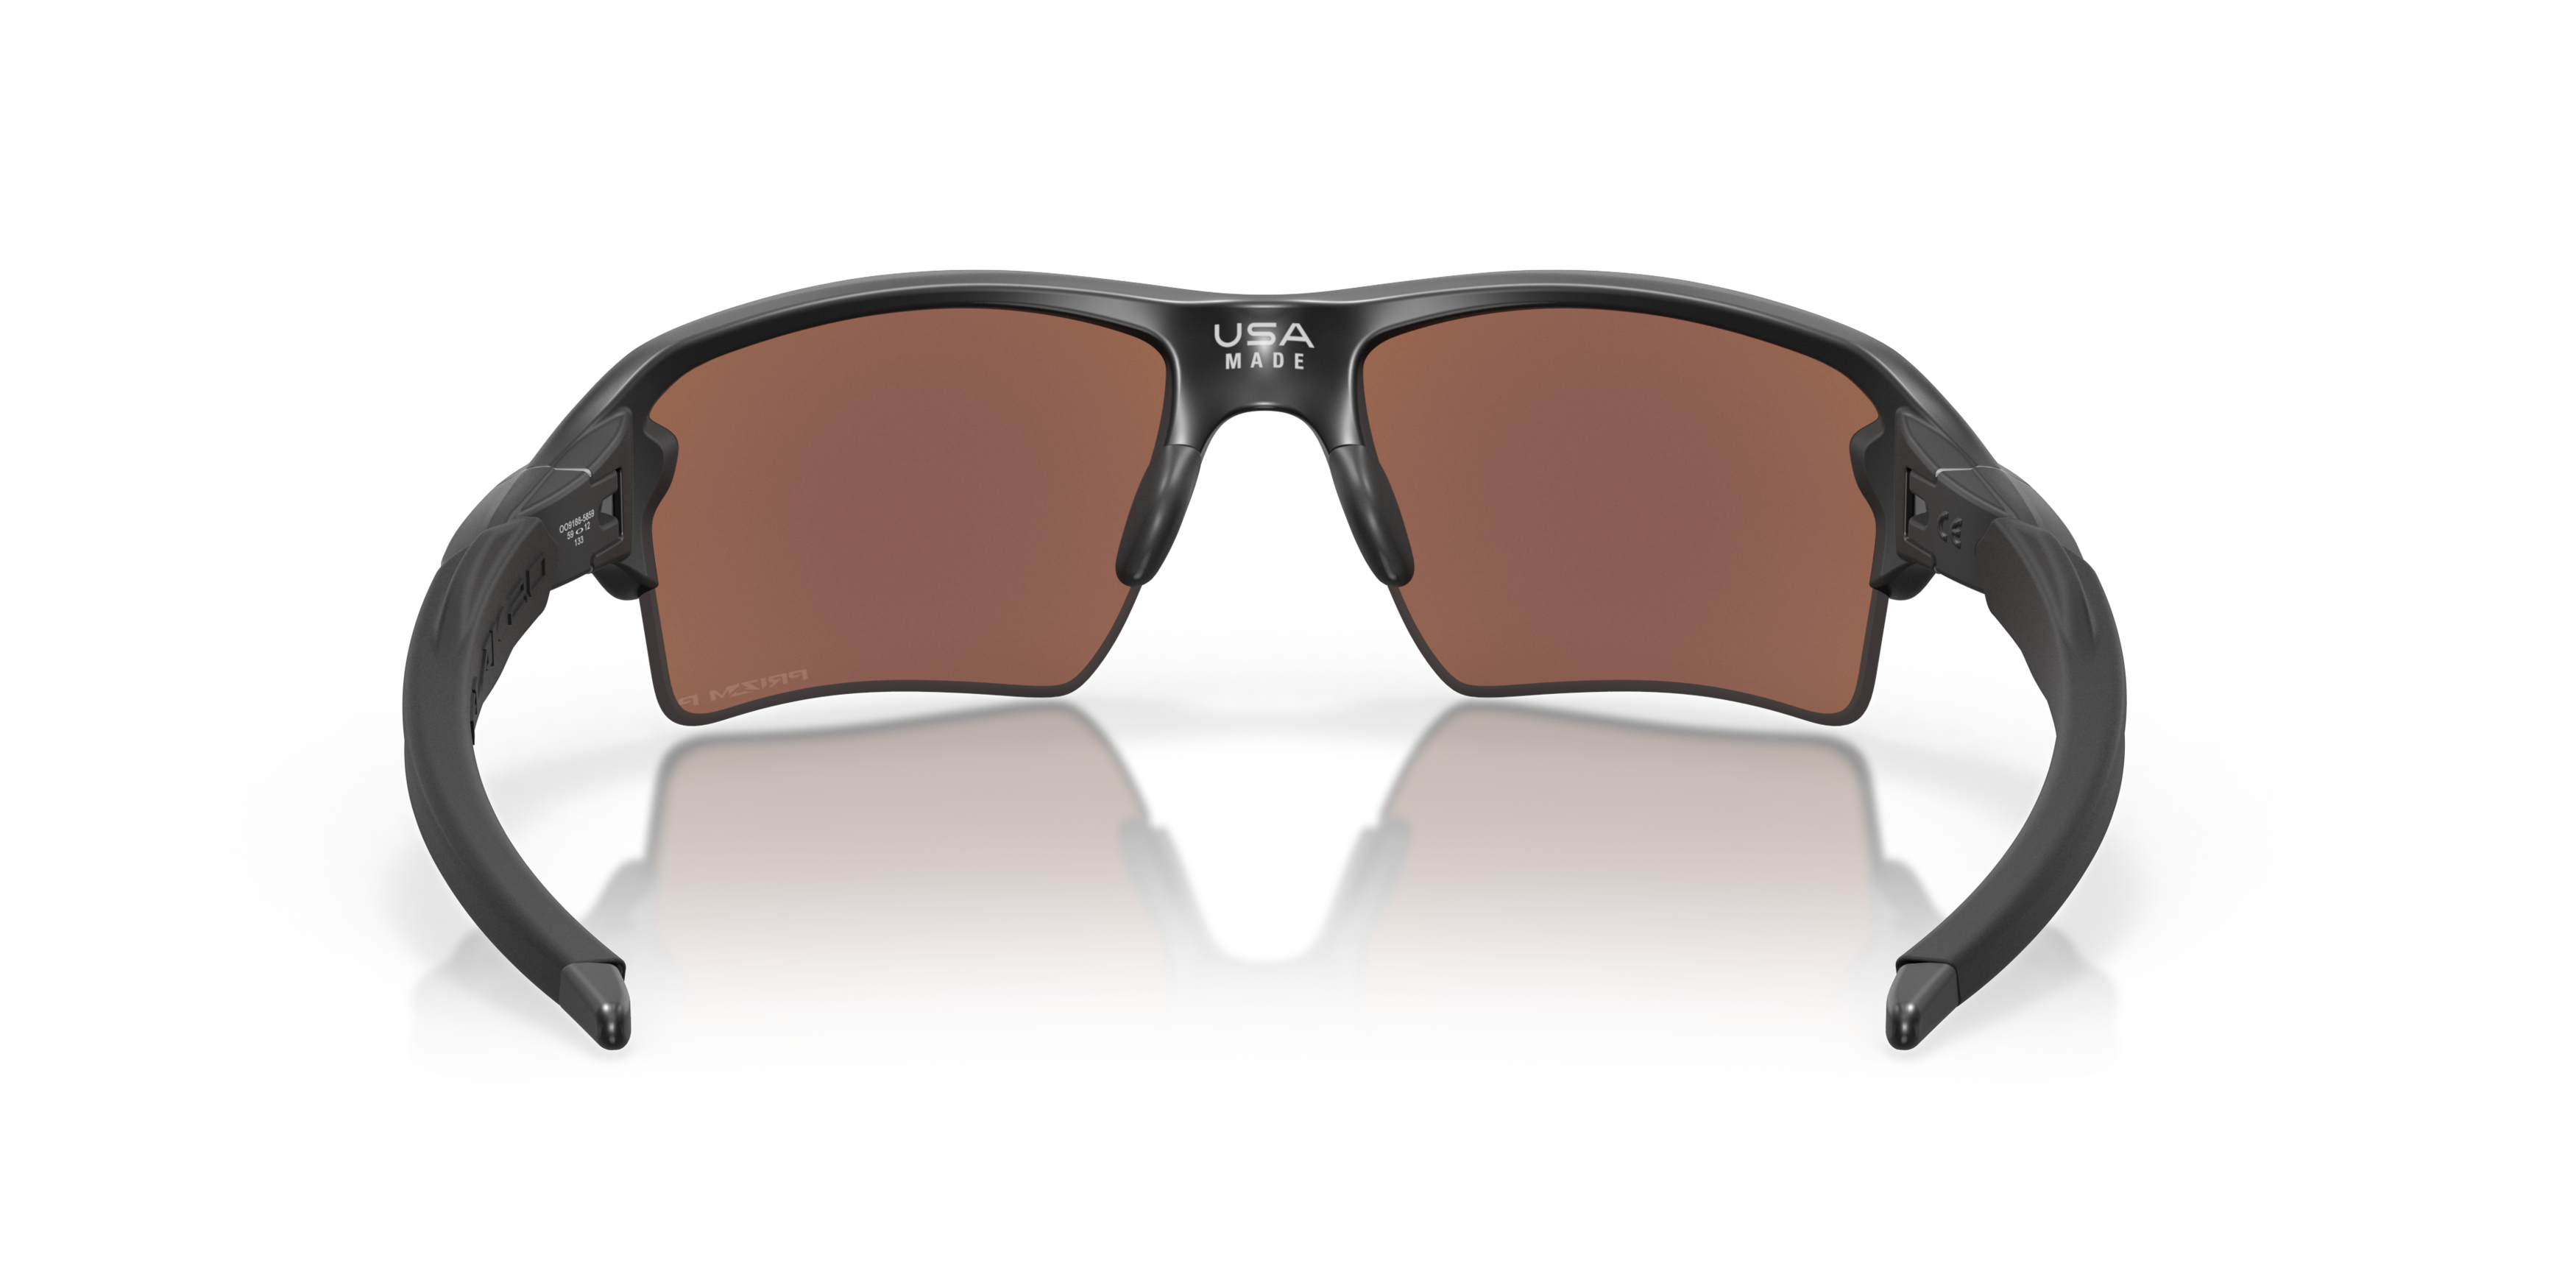 [products.image.detail02] Oakley Flak 2.0 XL OO 9188 Sunglasses